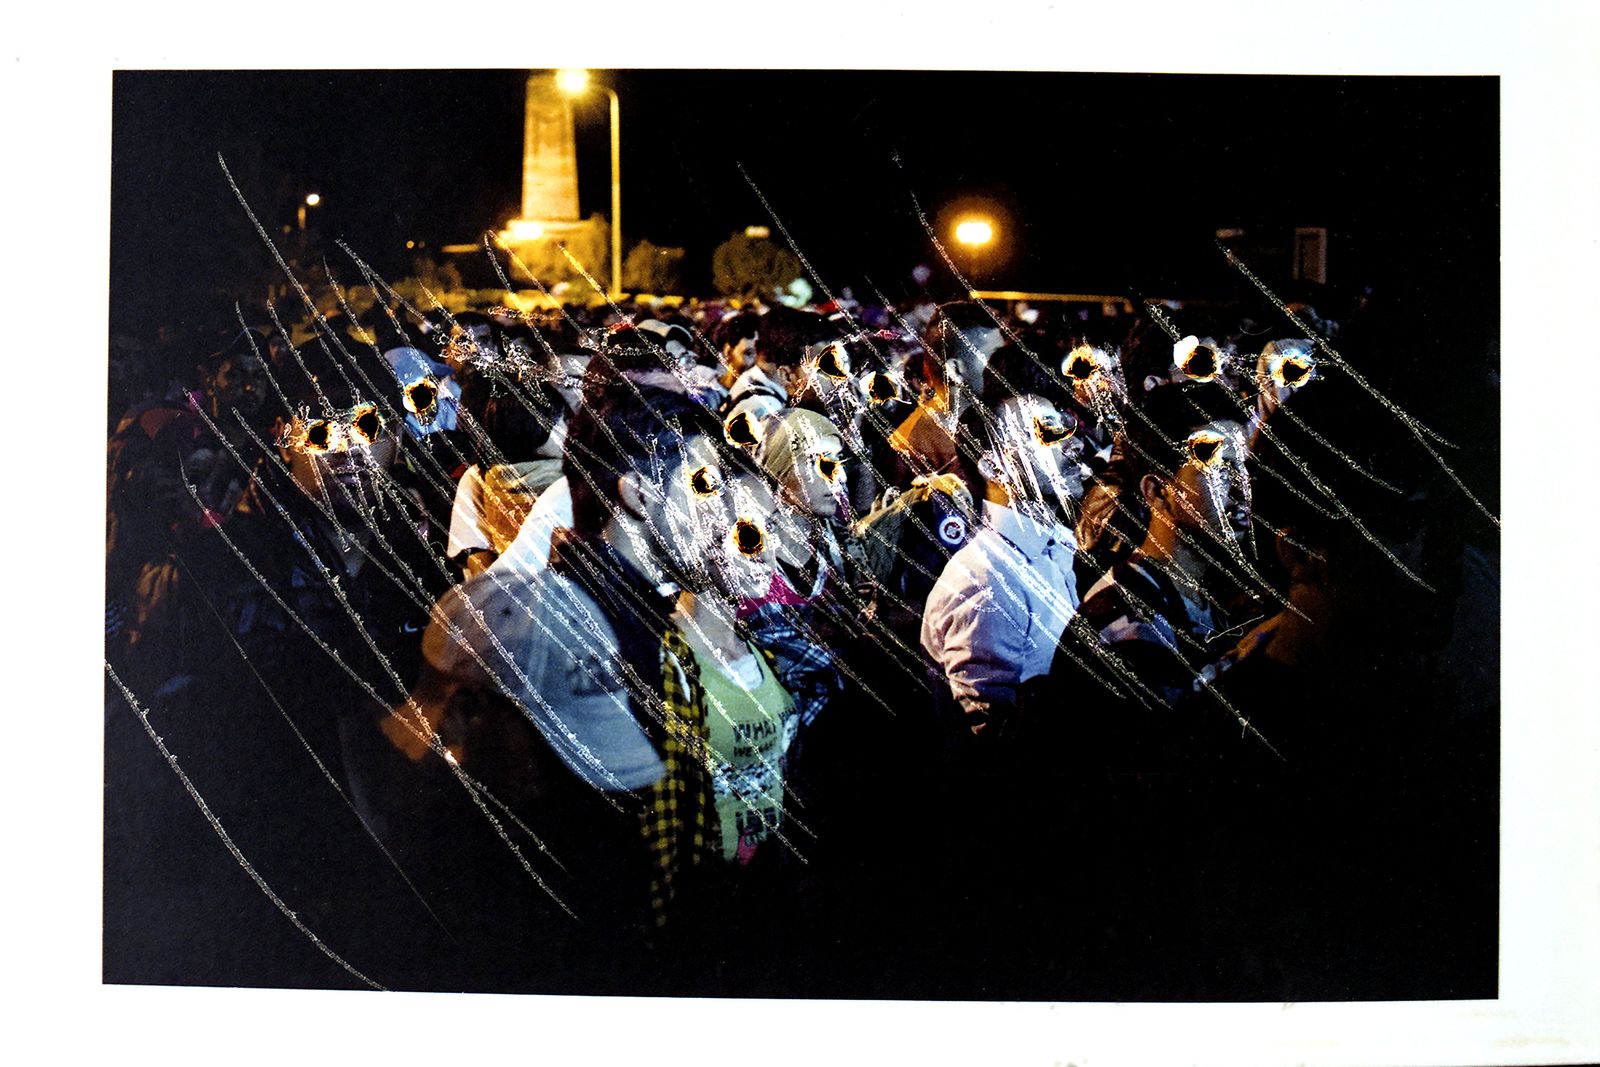 © Jesper Houborg - Image from the Forgetting the Refugee photography project